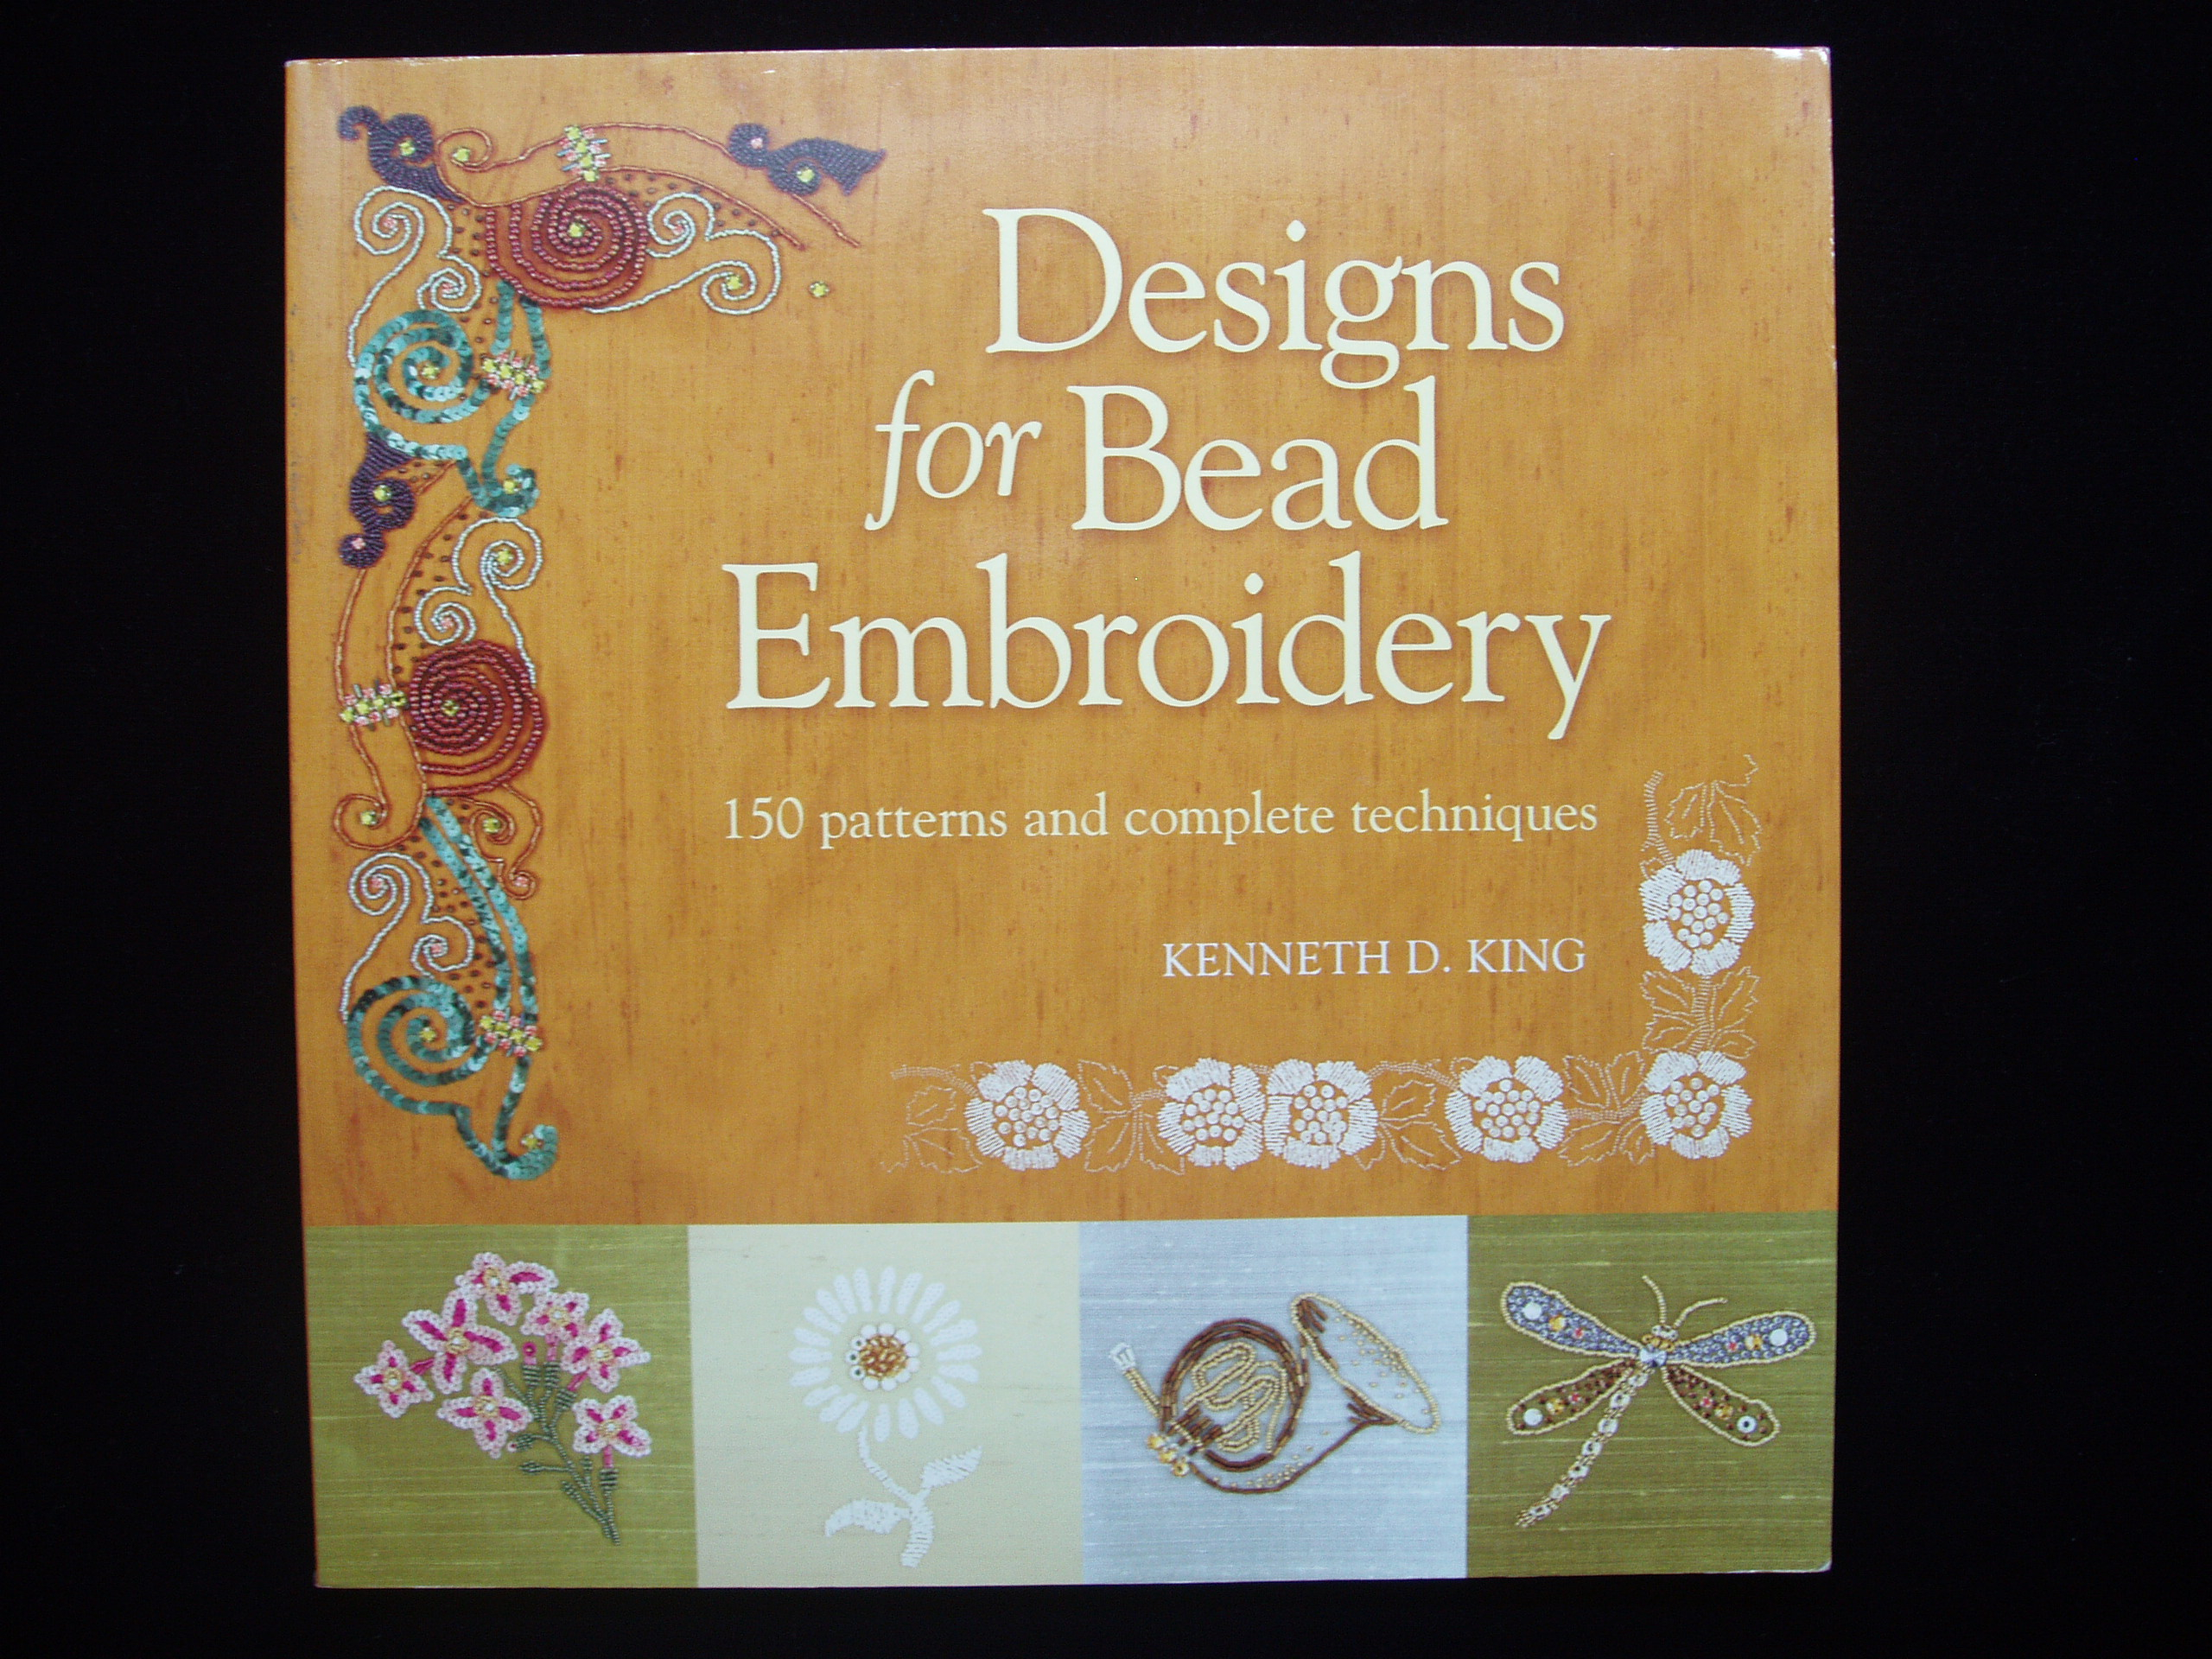 Bead Embroidery Patterns 17 Designs For Bead Embroidery Kenneth D King Worksofhands